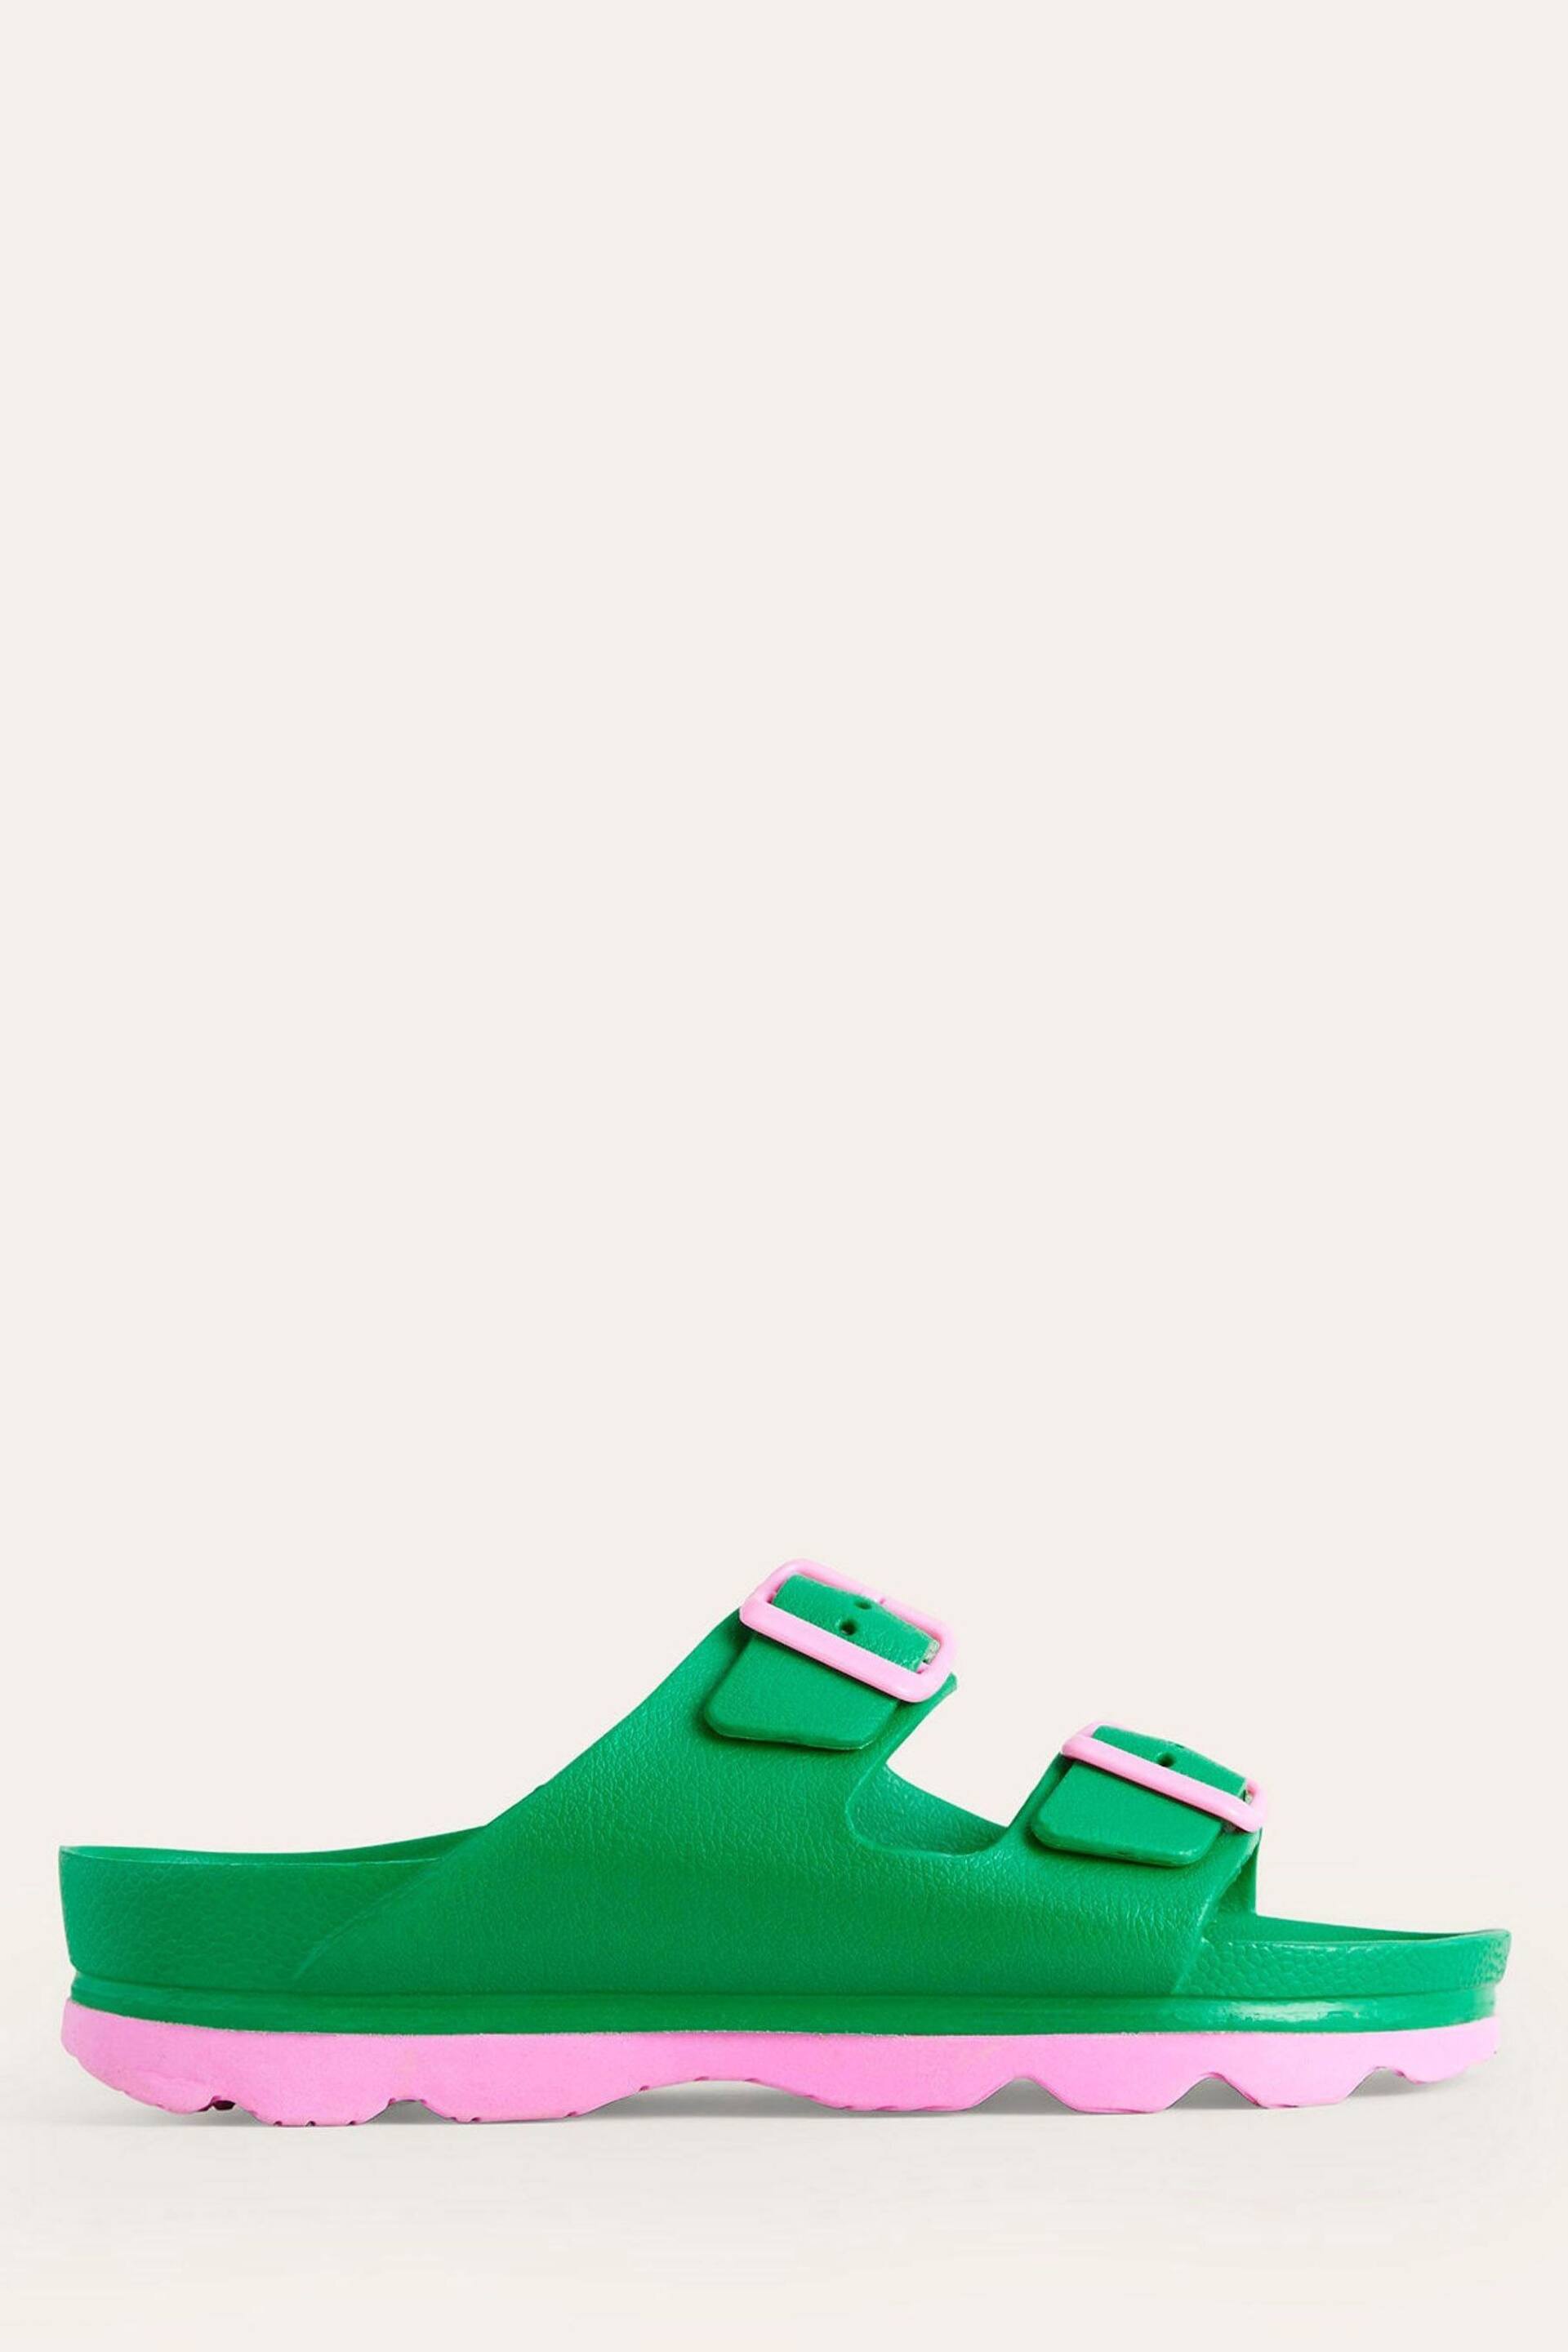 Boden Green Lyla Double Buckle Slides - Image 1 of 5